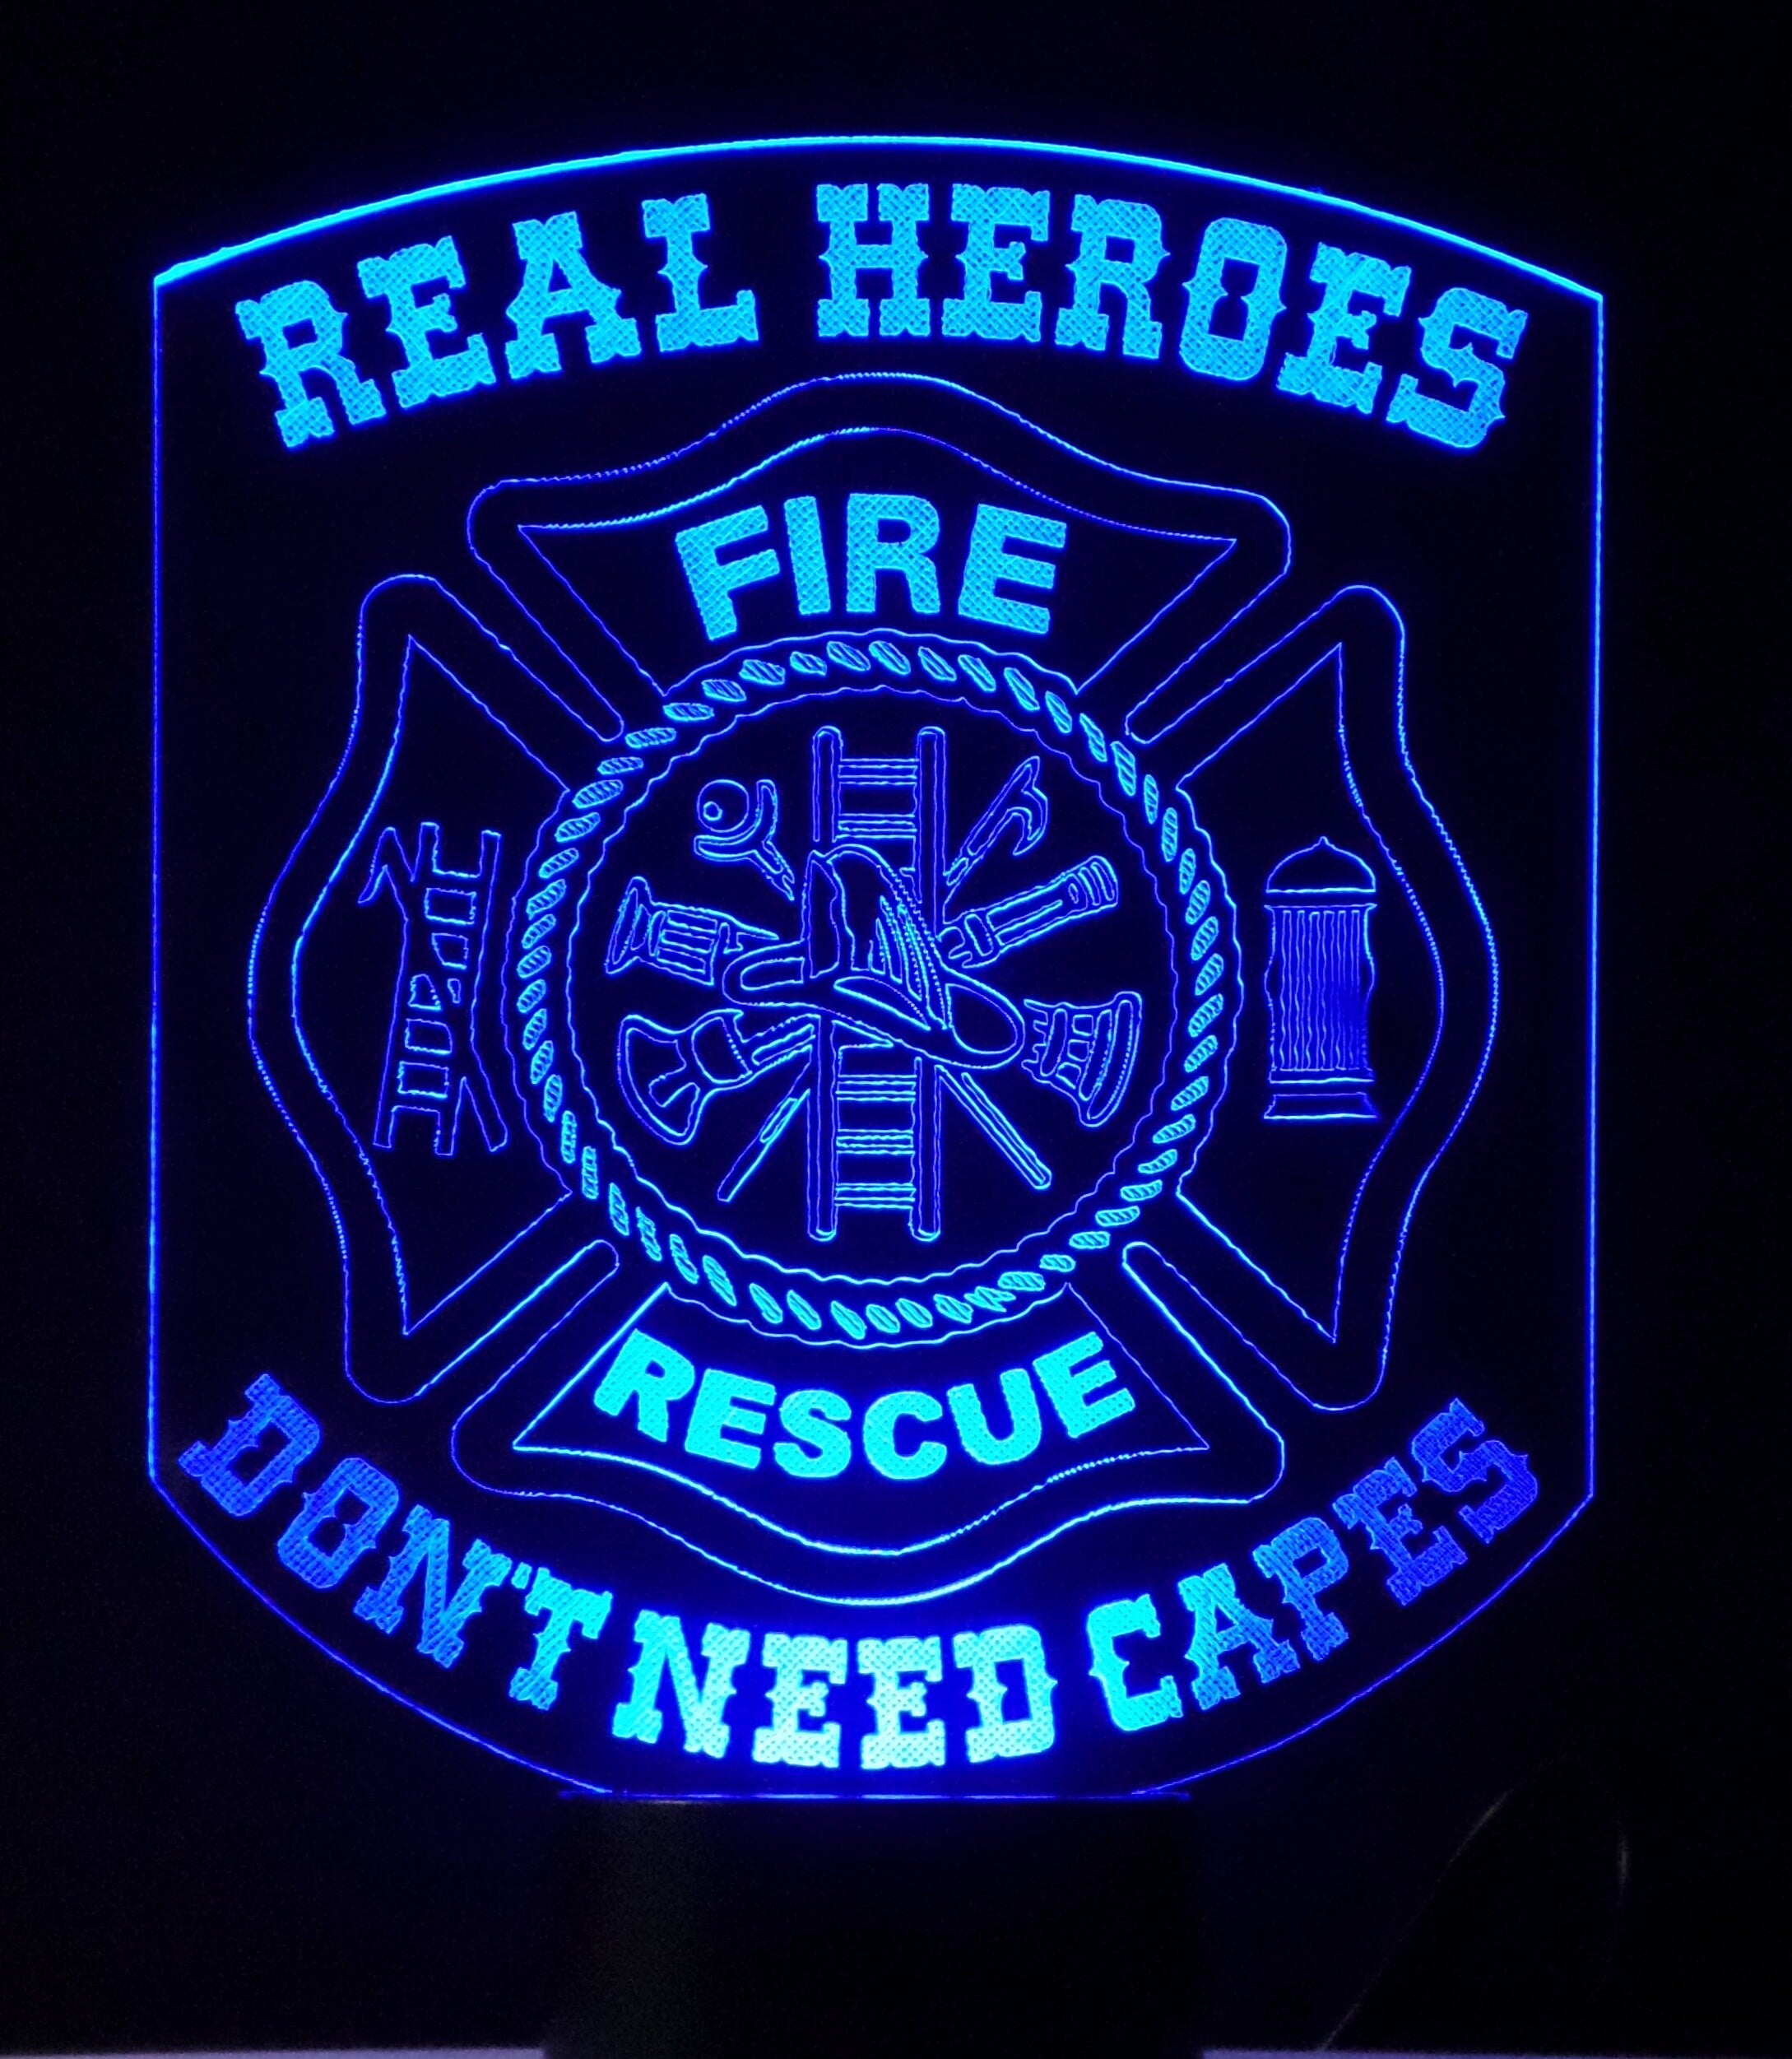 Awesome "Real Heroes - Don't Need Capes" Fire Rescue Maltese Cross LED Lamp (1096) - FREE SHIPPING!